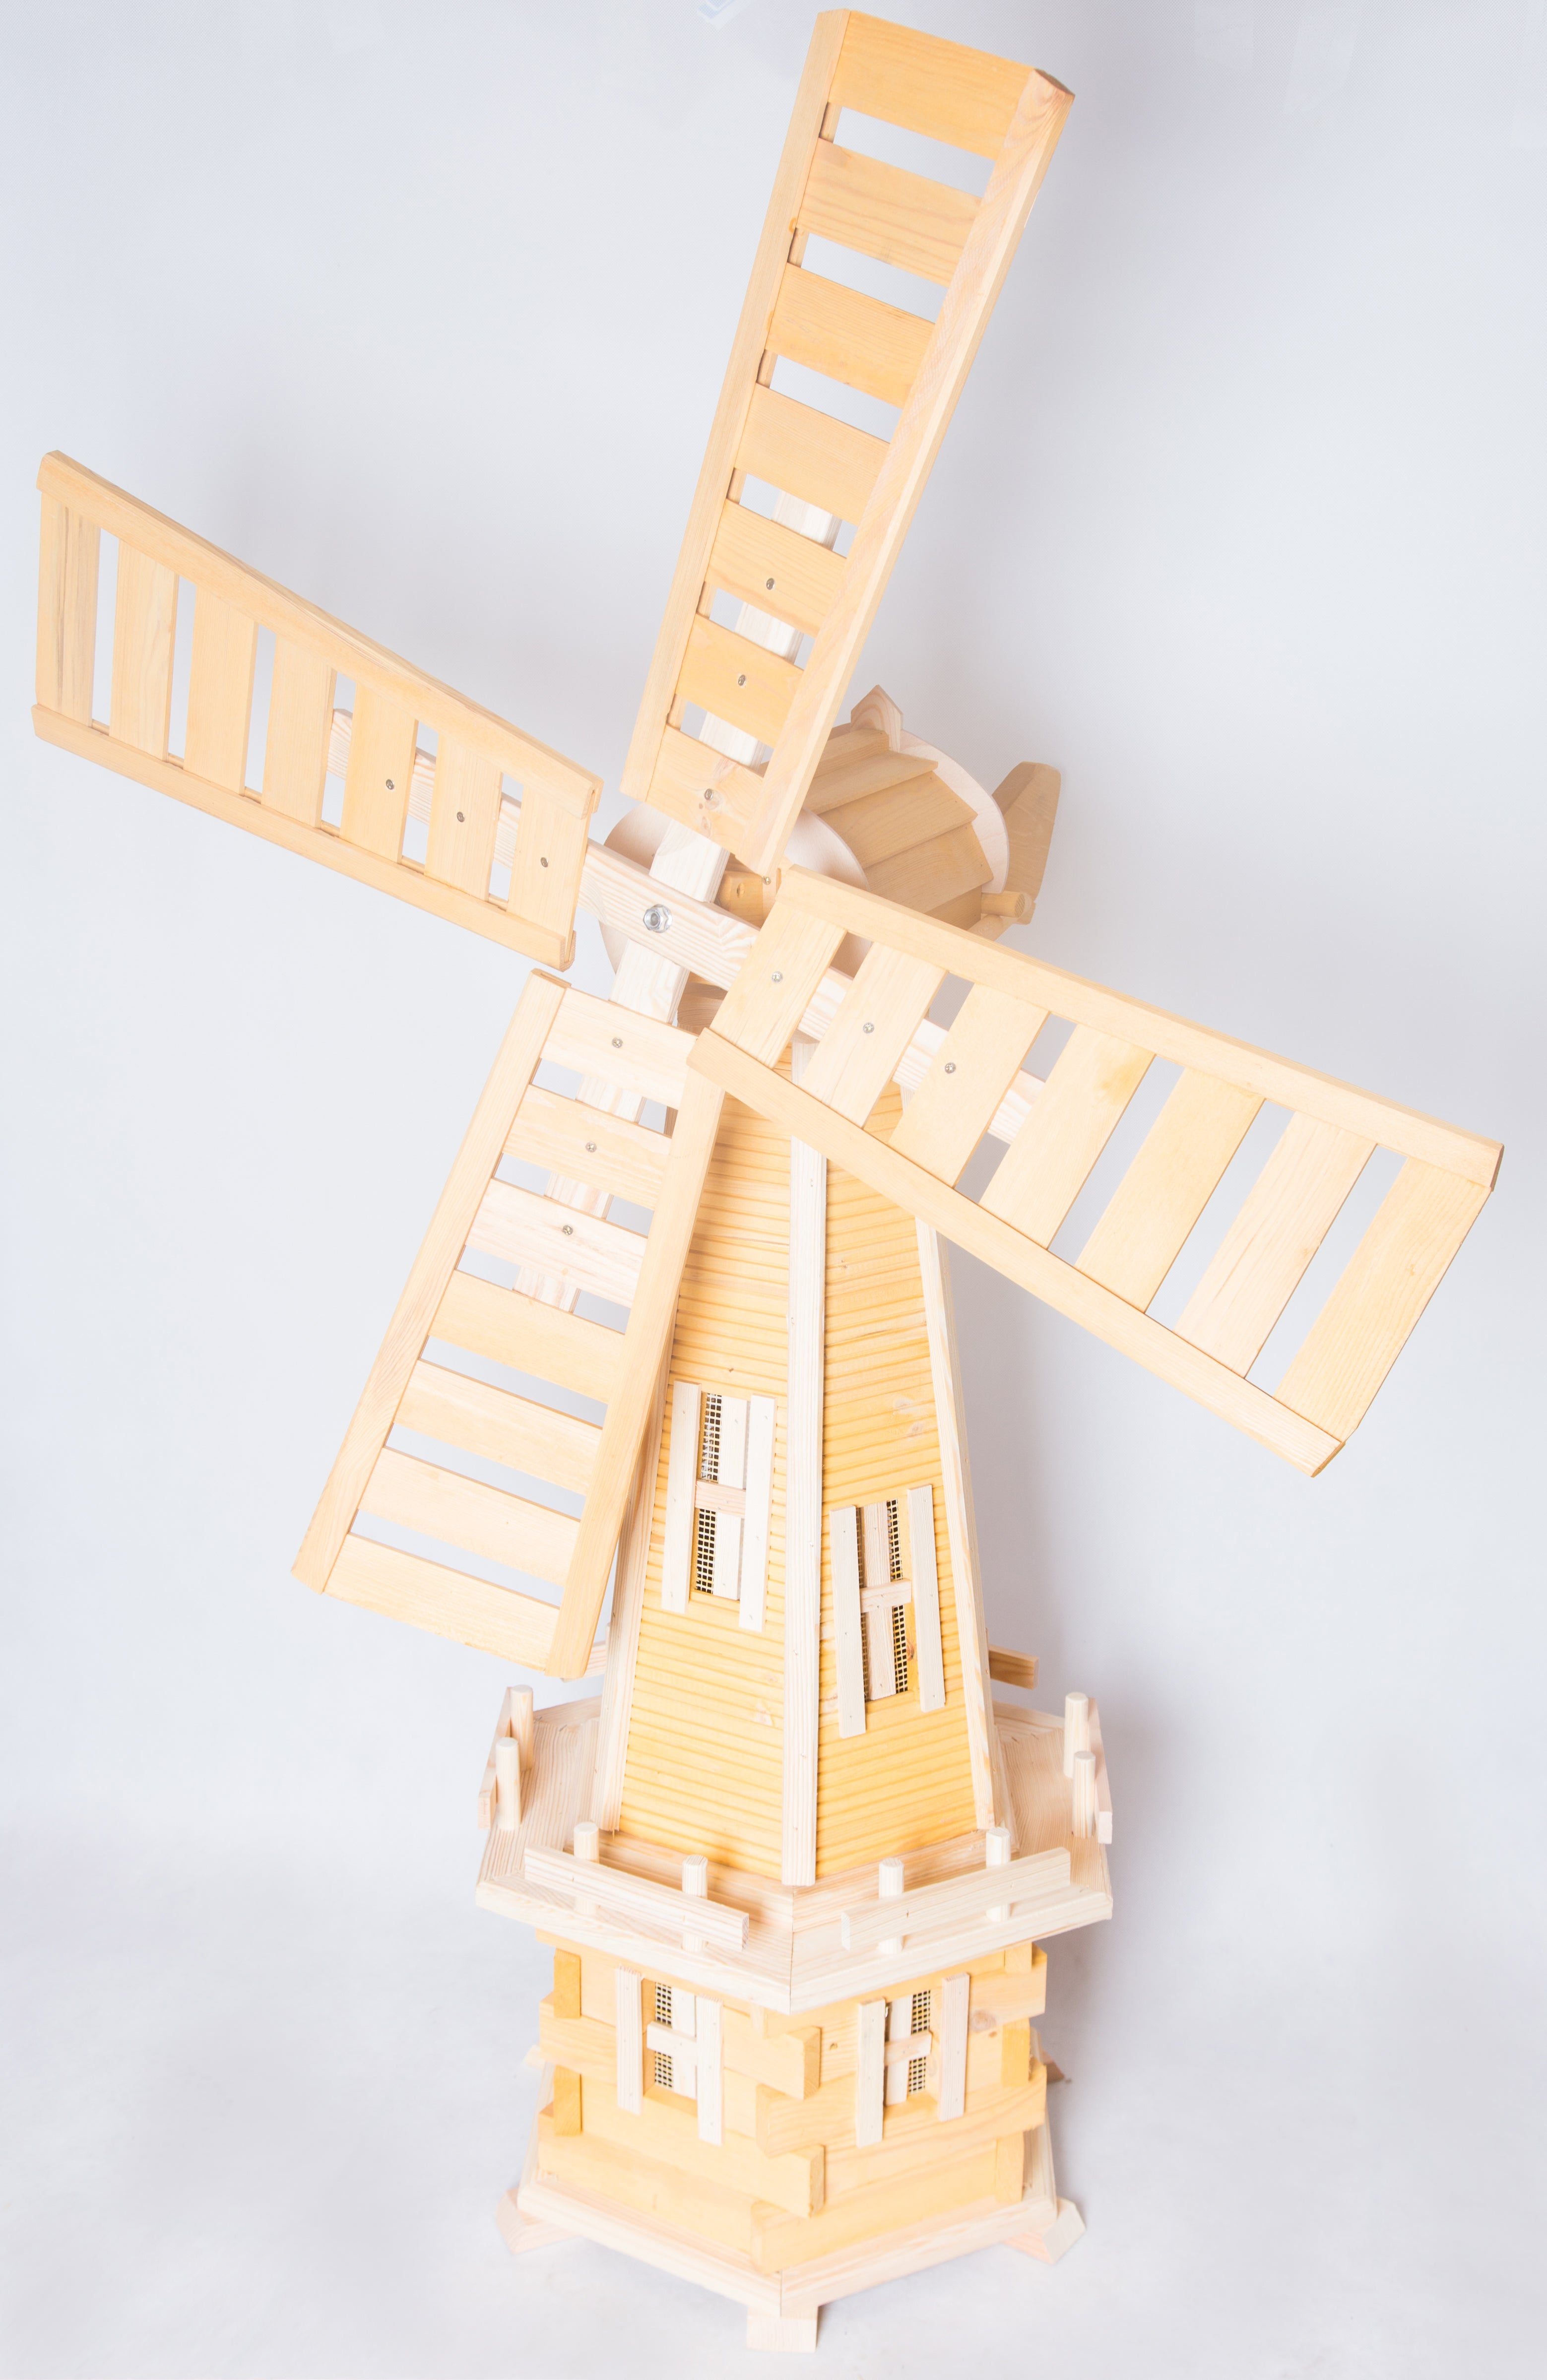 Garden windmill with wooden blades, spinning in the wind to create a picturesque outdoor scene.